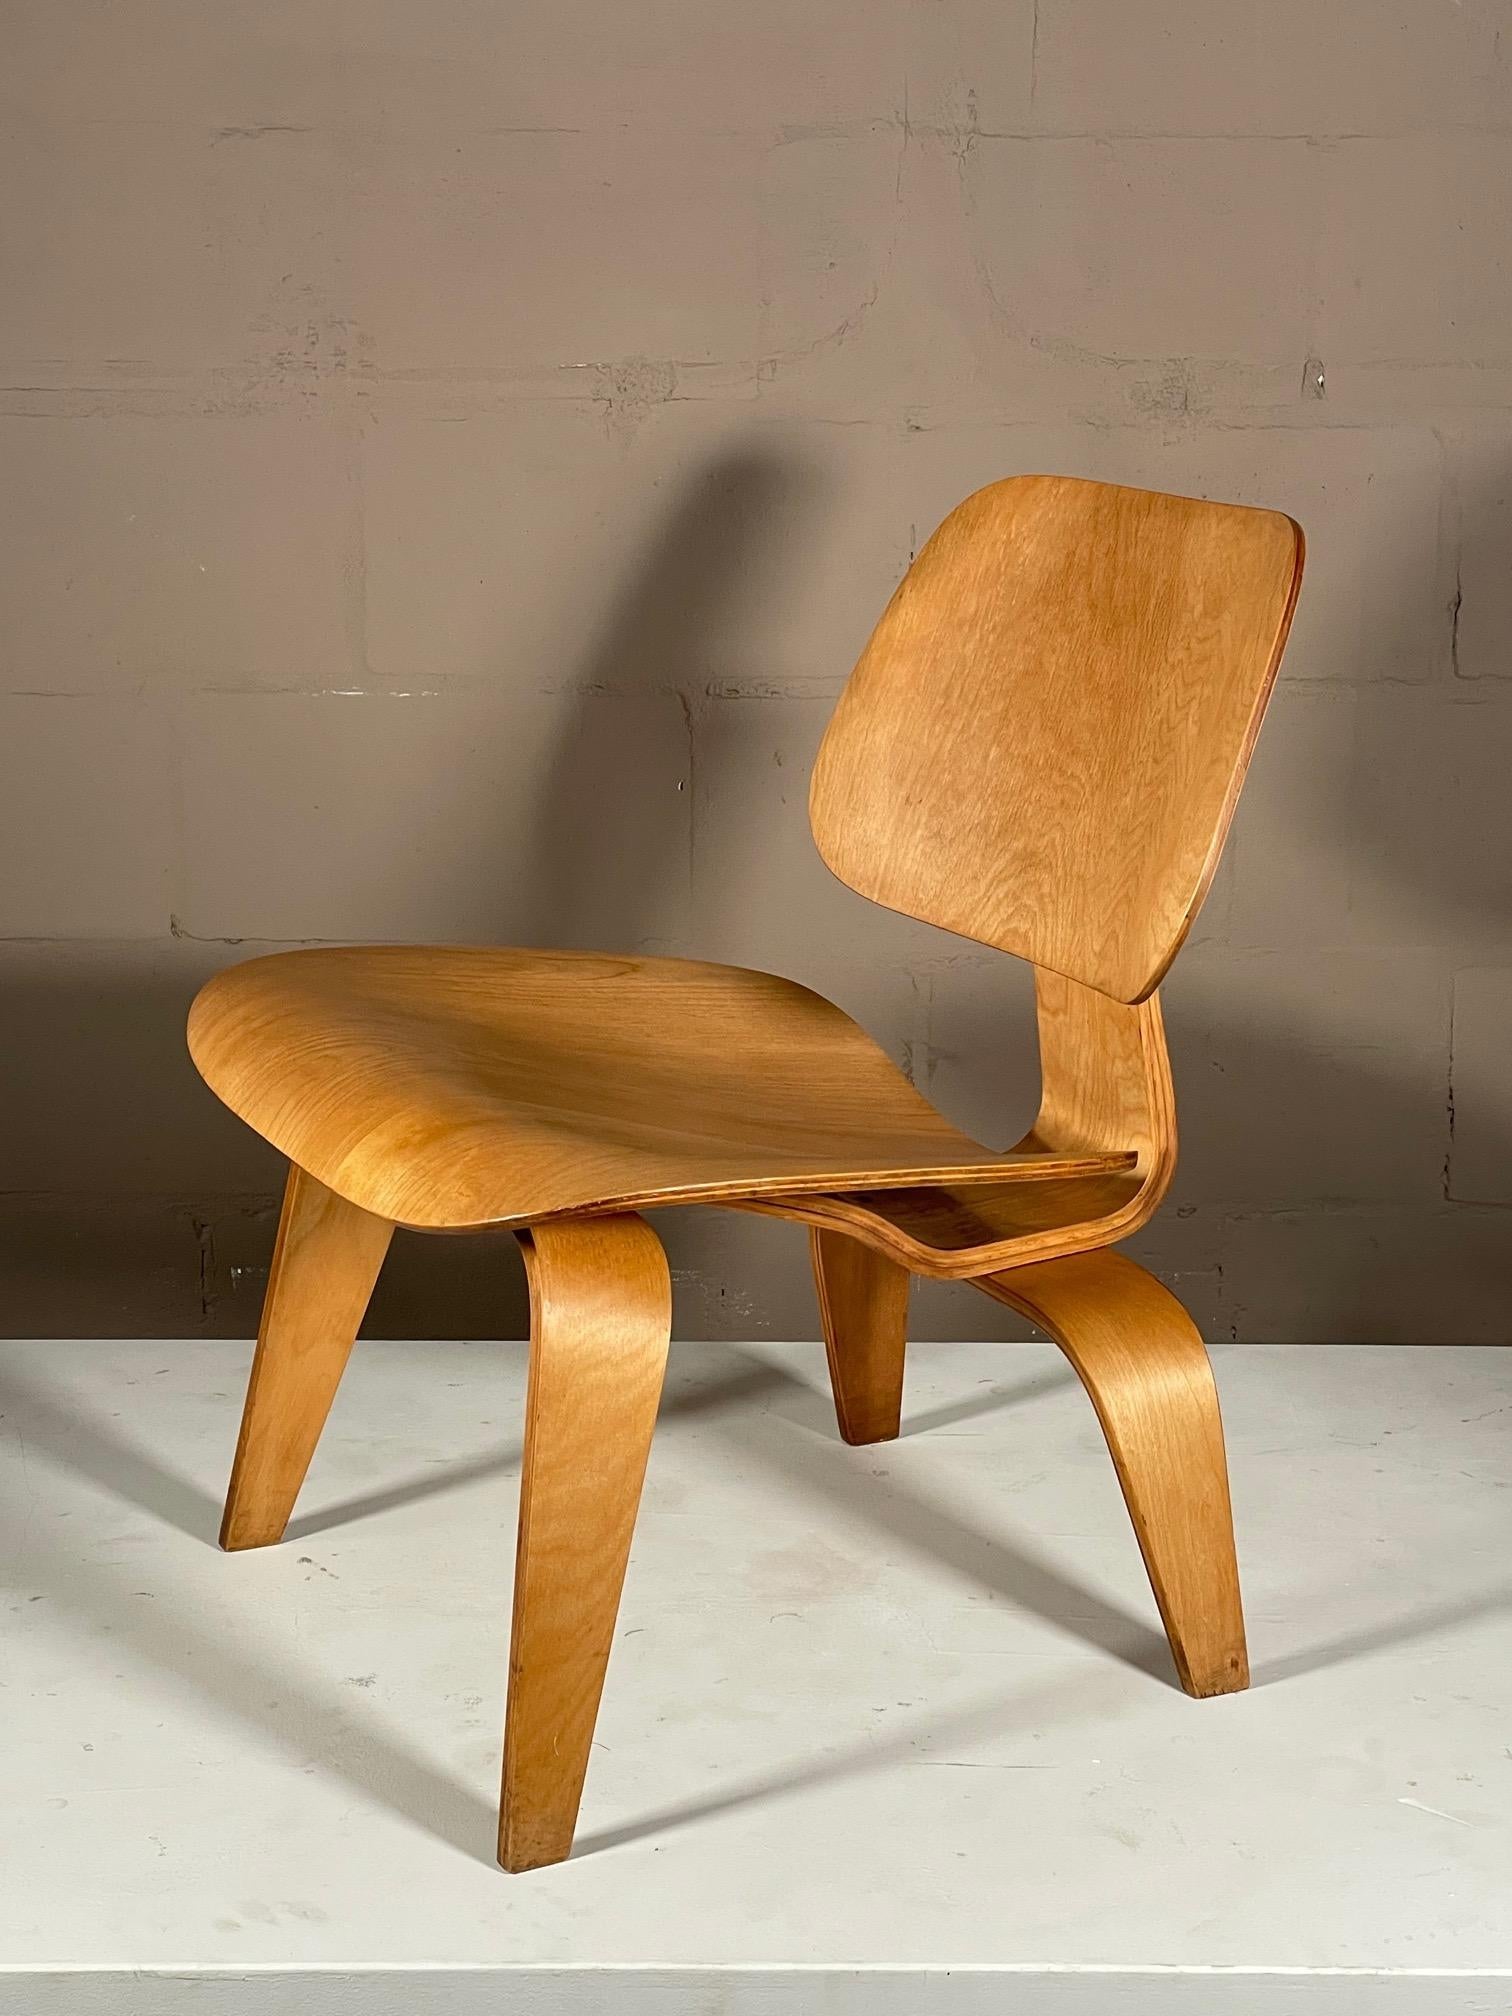 An excellent example of Charles Eames Herman Miller/Evans 1940's LCW (lounge chair wood). All original with original shock mounts, screws and label intact.